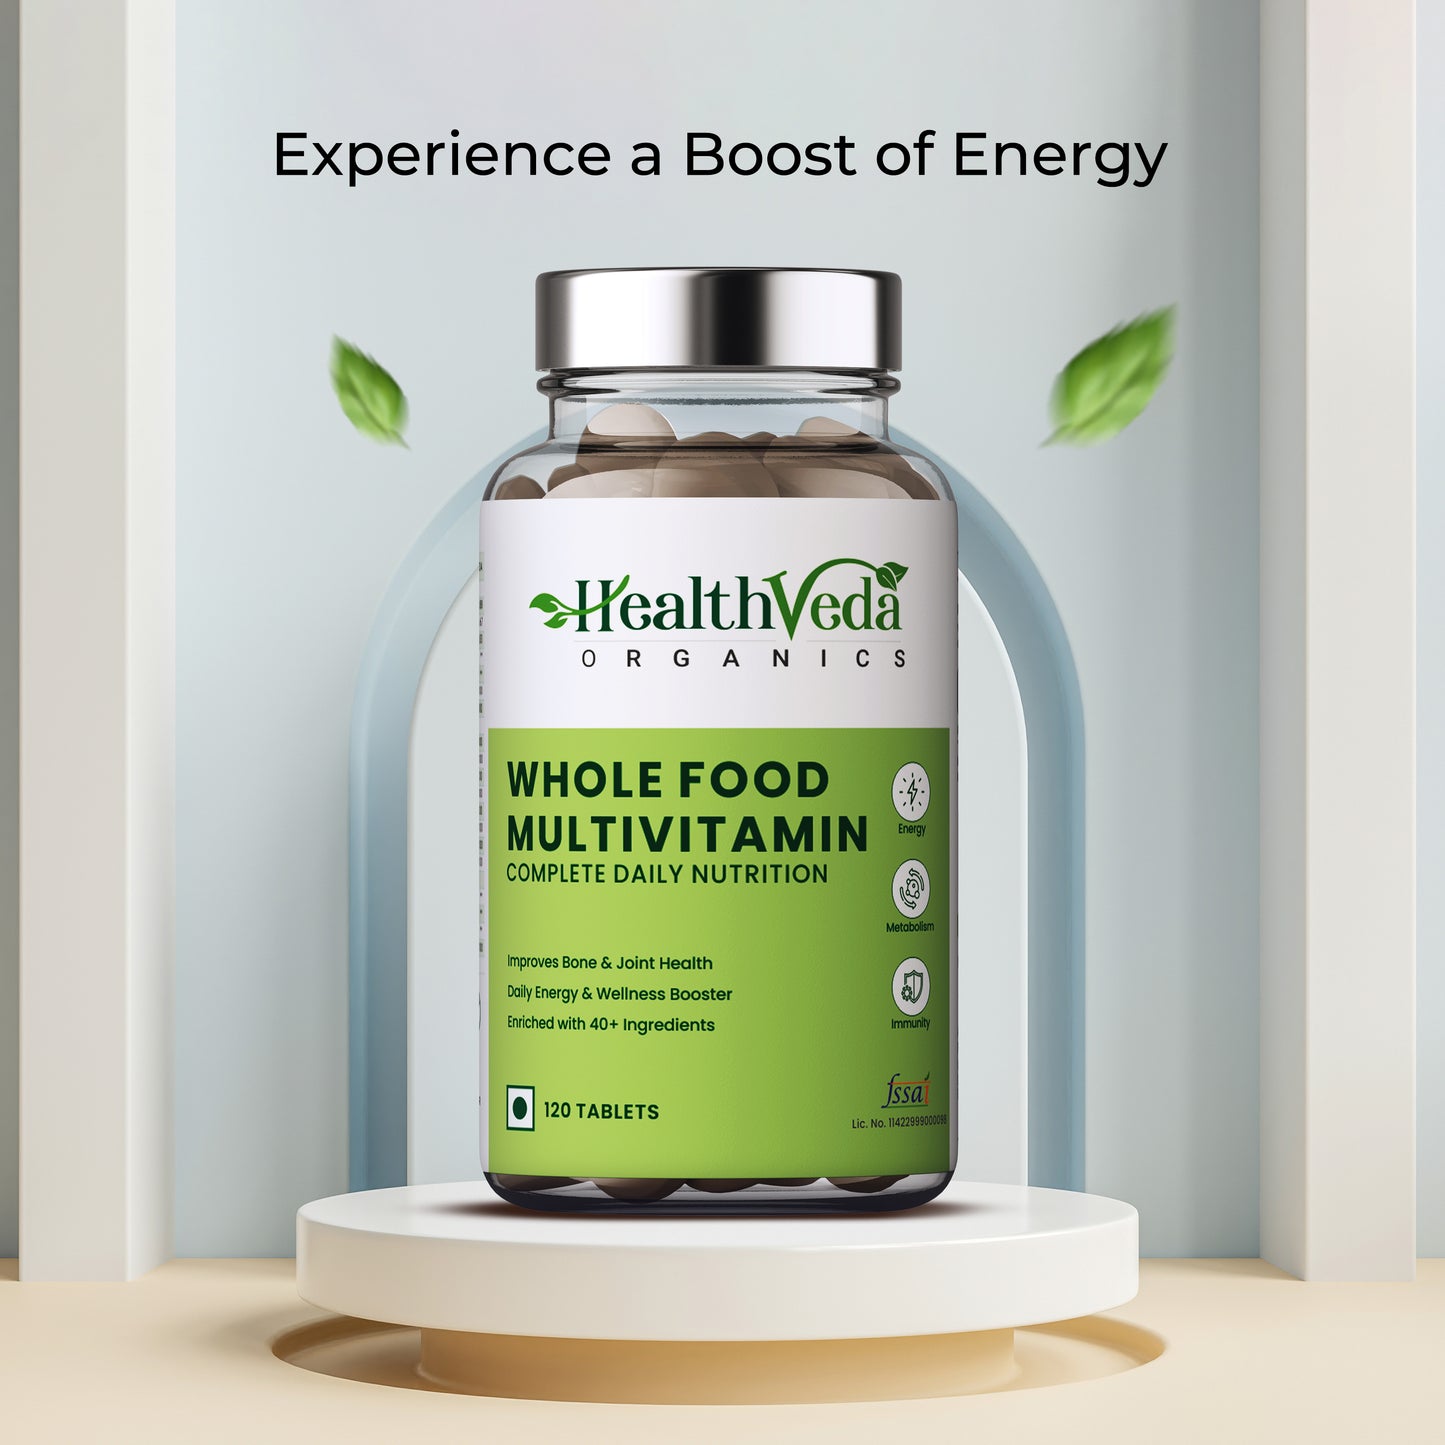 Whole Food Multivitamin packed with Natural Vitamins & Minerals Best for Energy, Brain, Heart Health, & Eye Health - 120 Veg Tablets for Men & Women